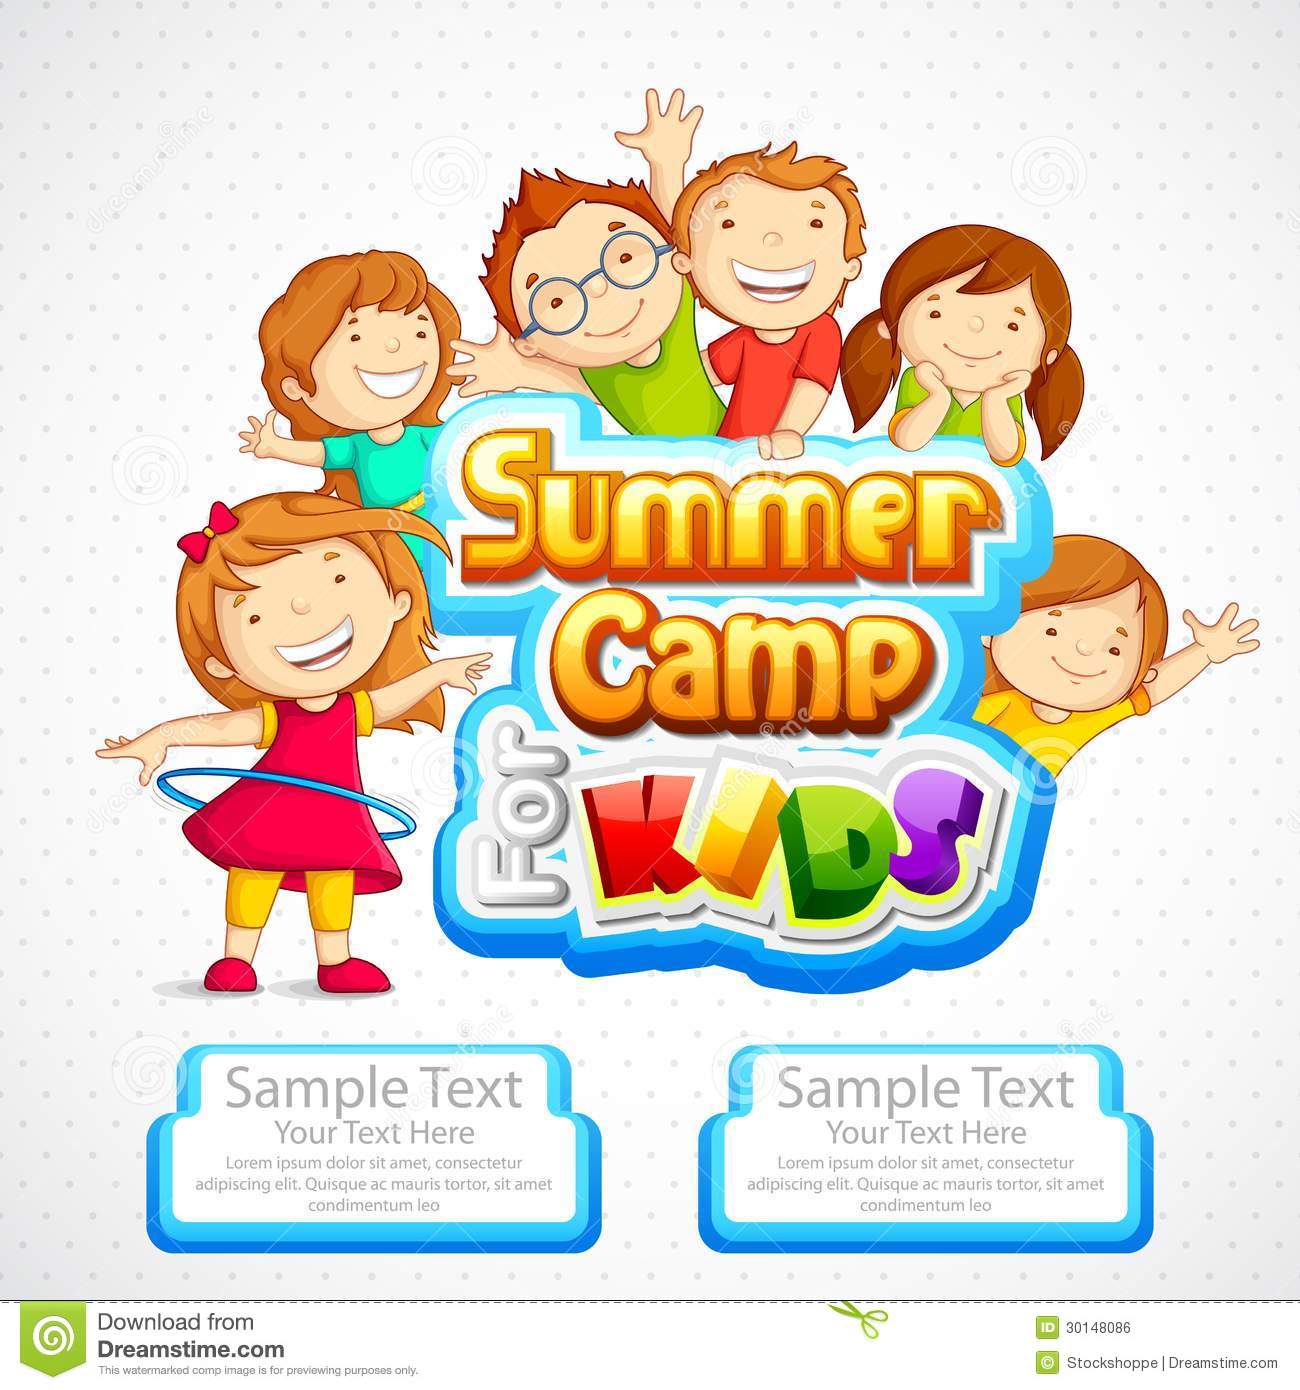 Summer Camp For Kids Royalty Free Stock Image   Image  30148086